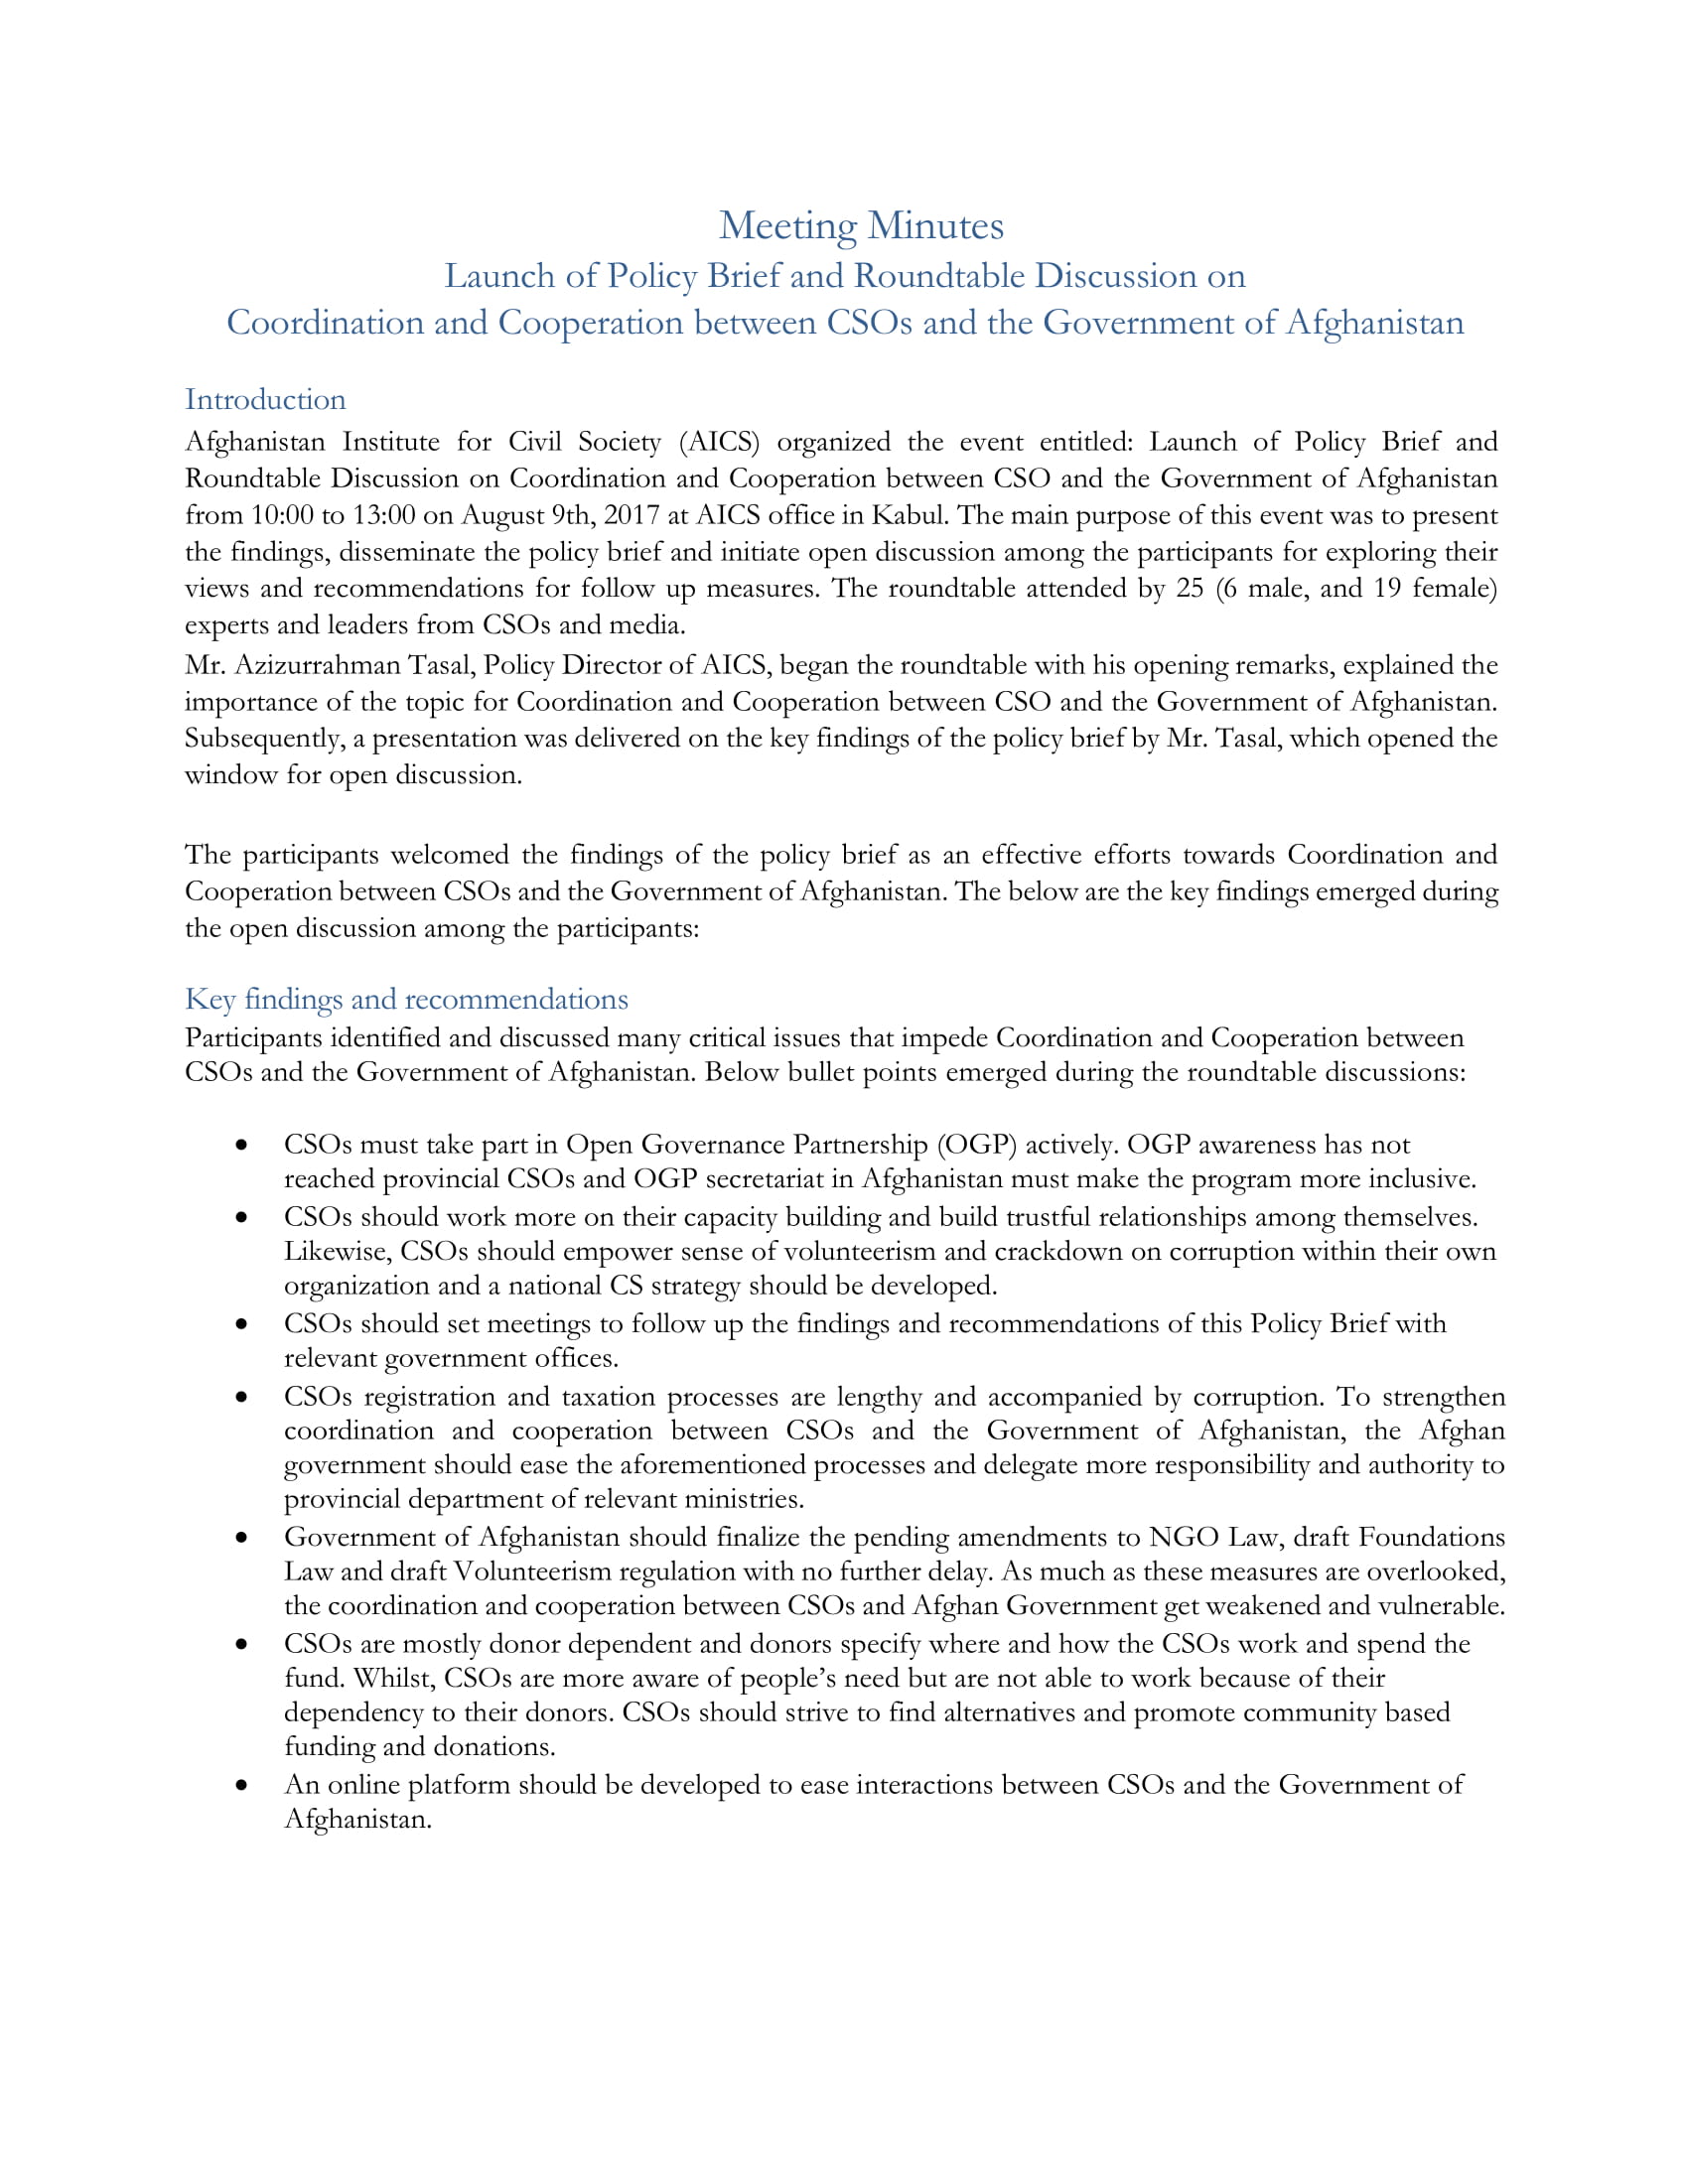 Launch of Policy Brief and Roundtable Discussion on Coordination and Cooperation between CSOs and the Government of Afghanistan 